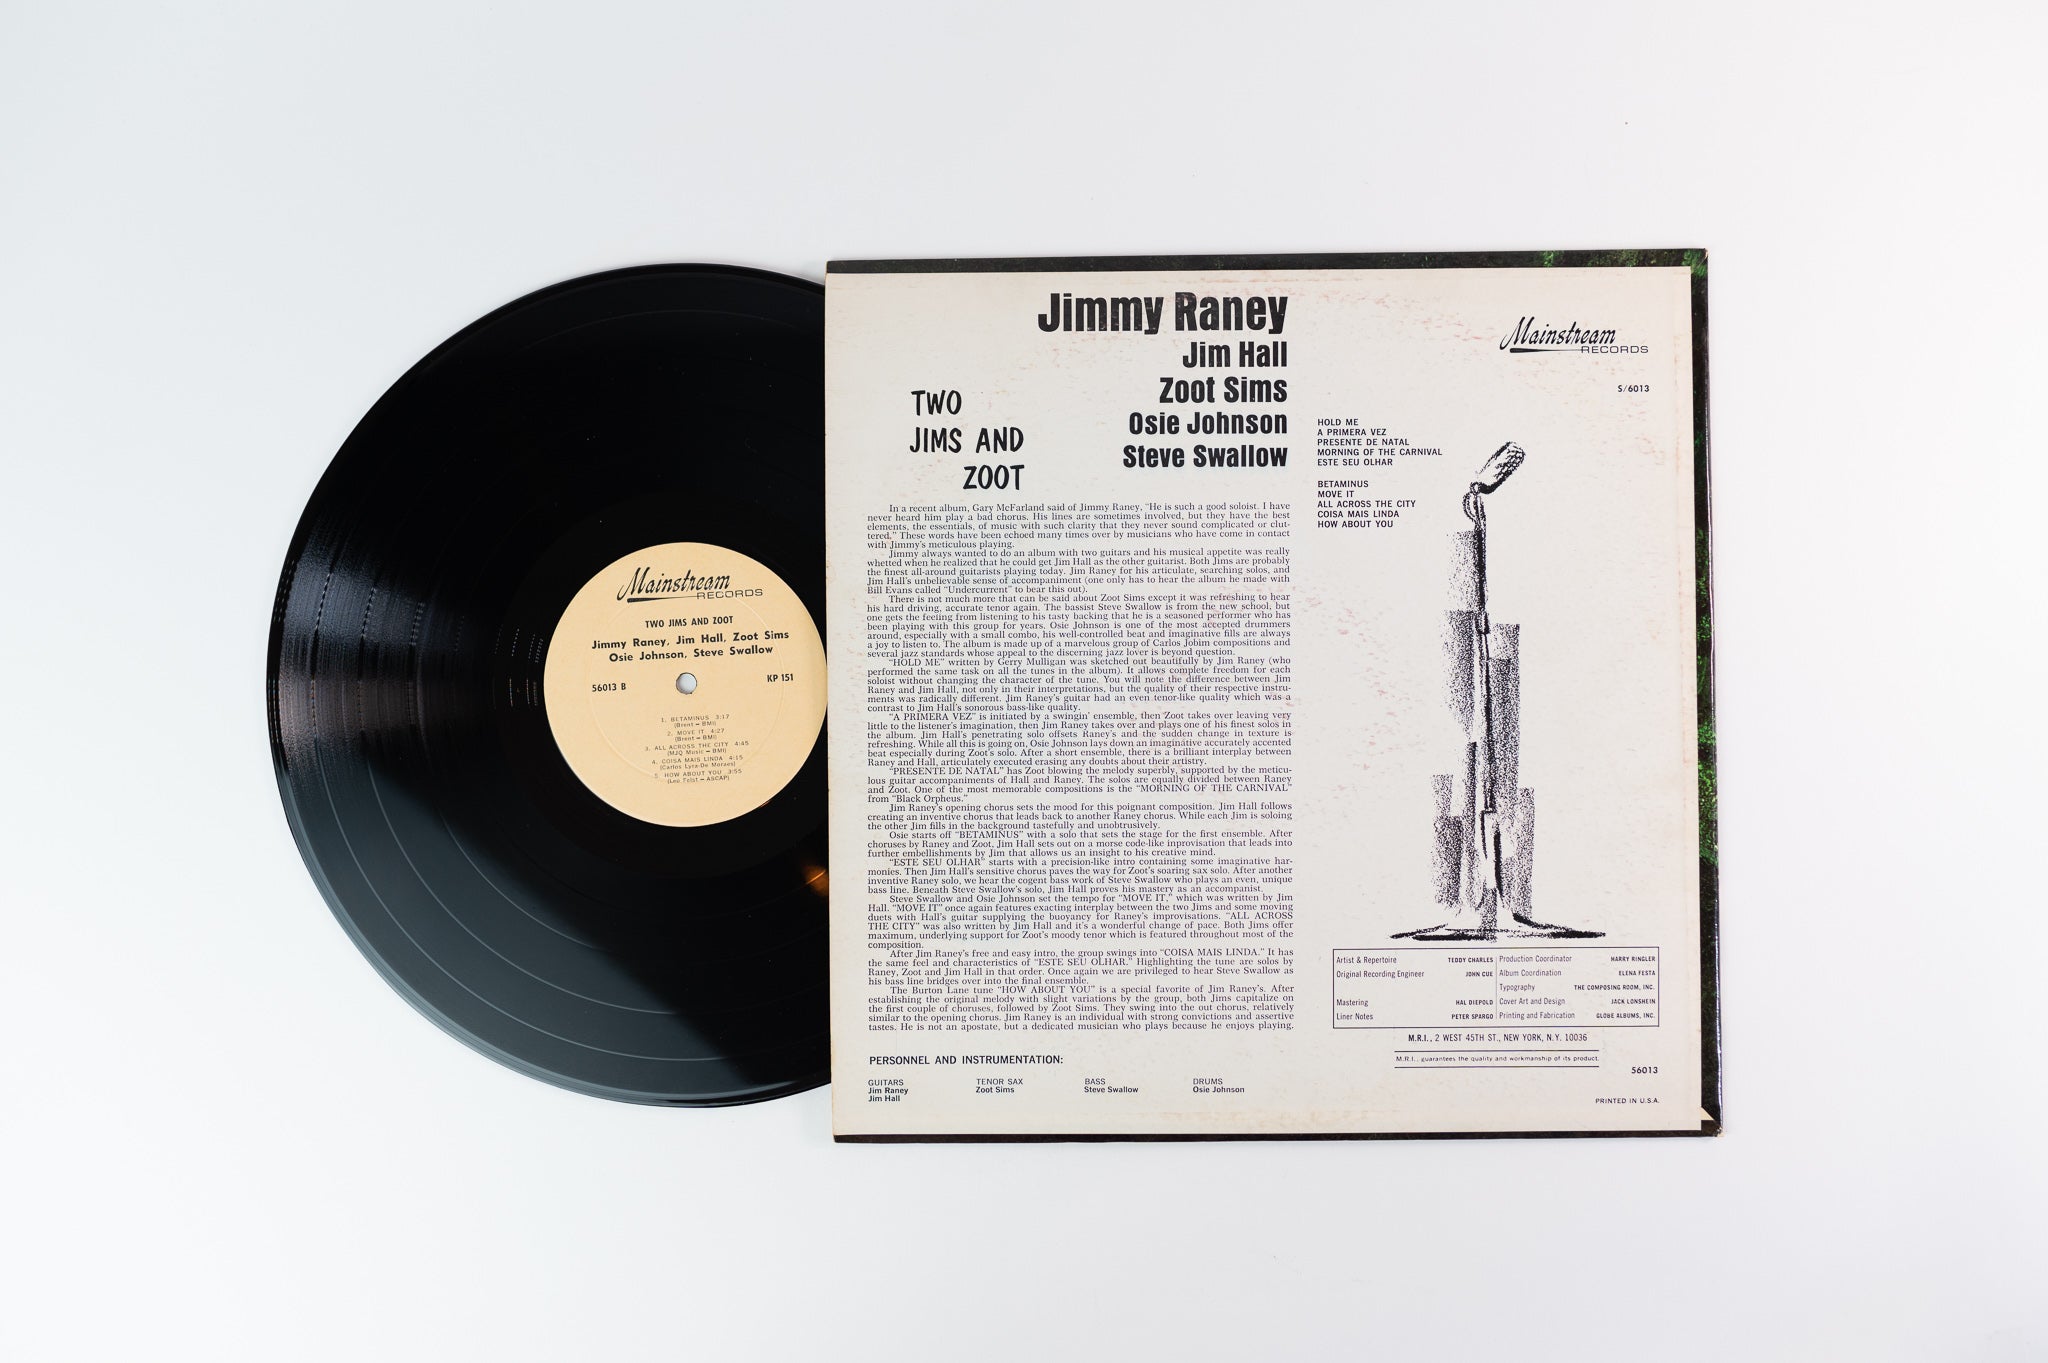 Jimmy Raney - Two Jims And Zoot on Mainstream Mono Deep Groove White Label